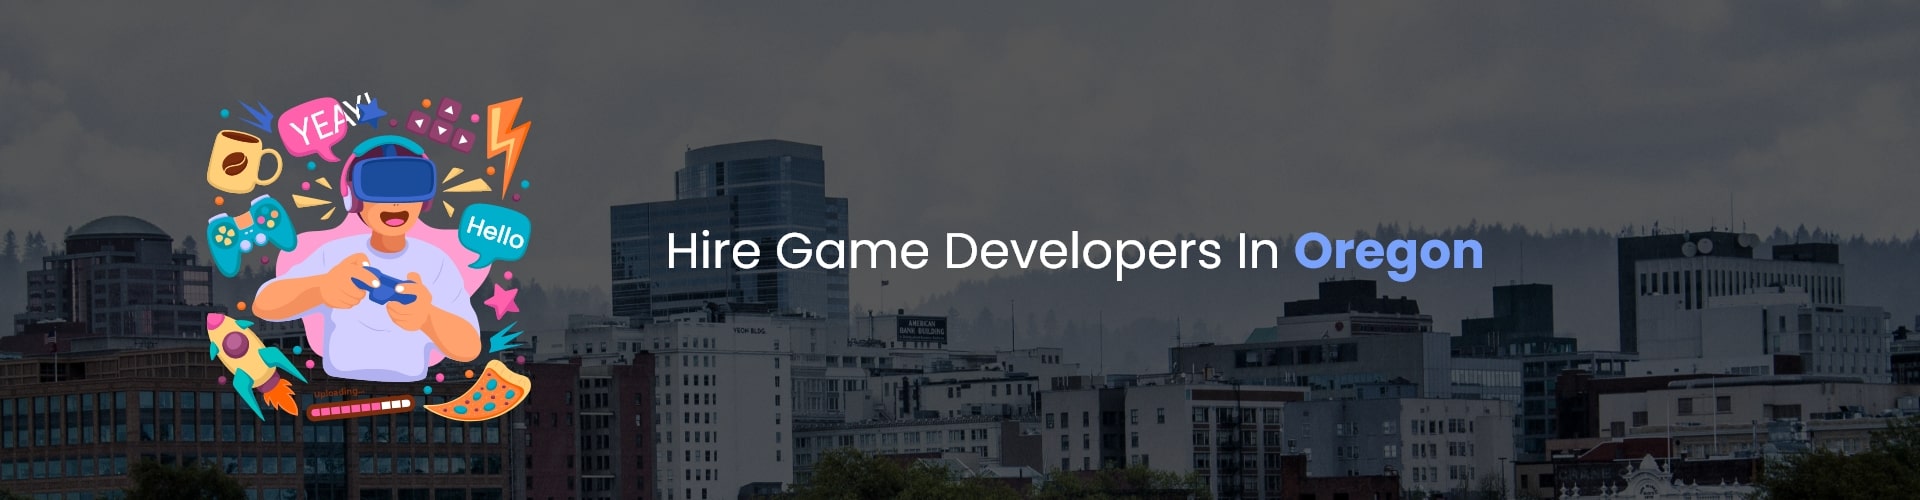 hire game developers in oregon